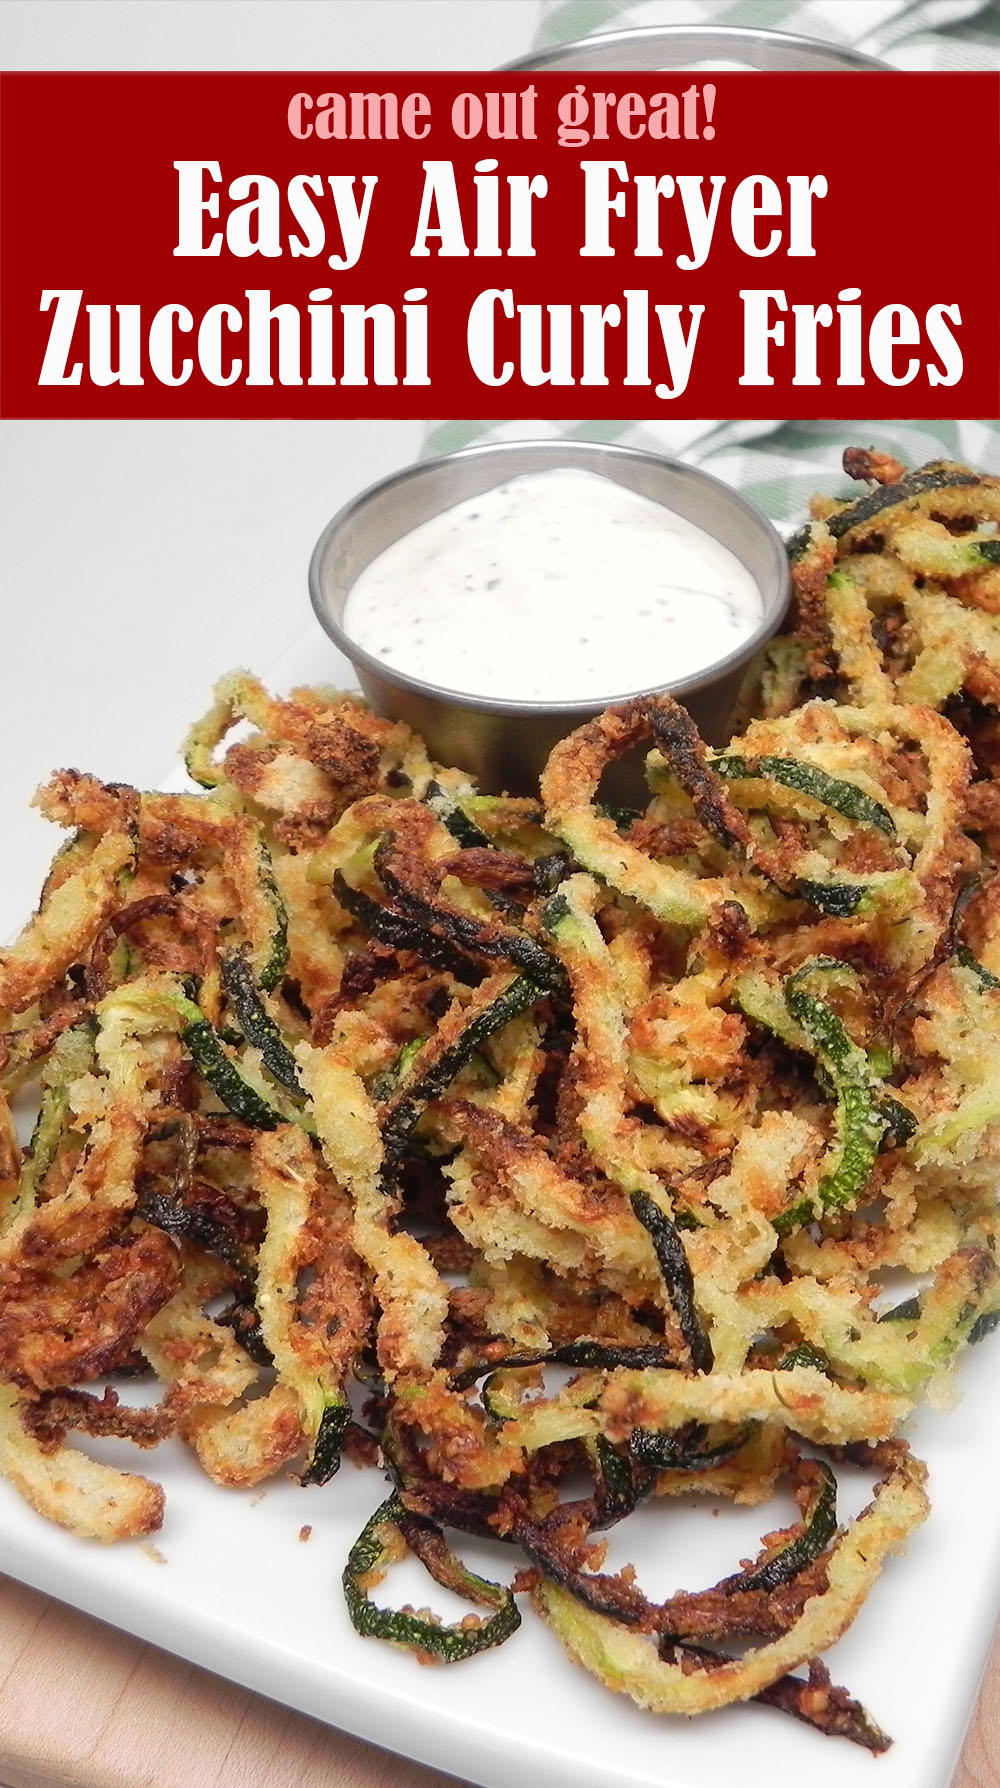 Easy Air Fryer Zucchini Curly Fries